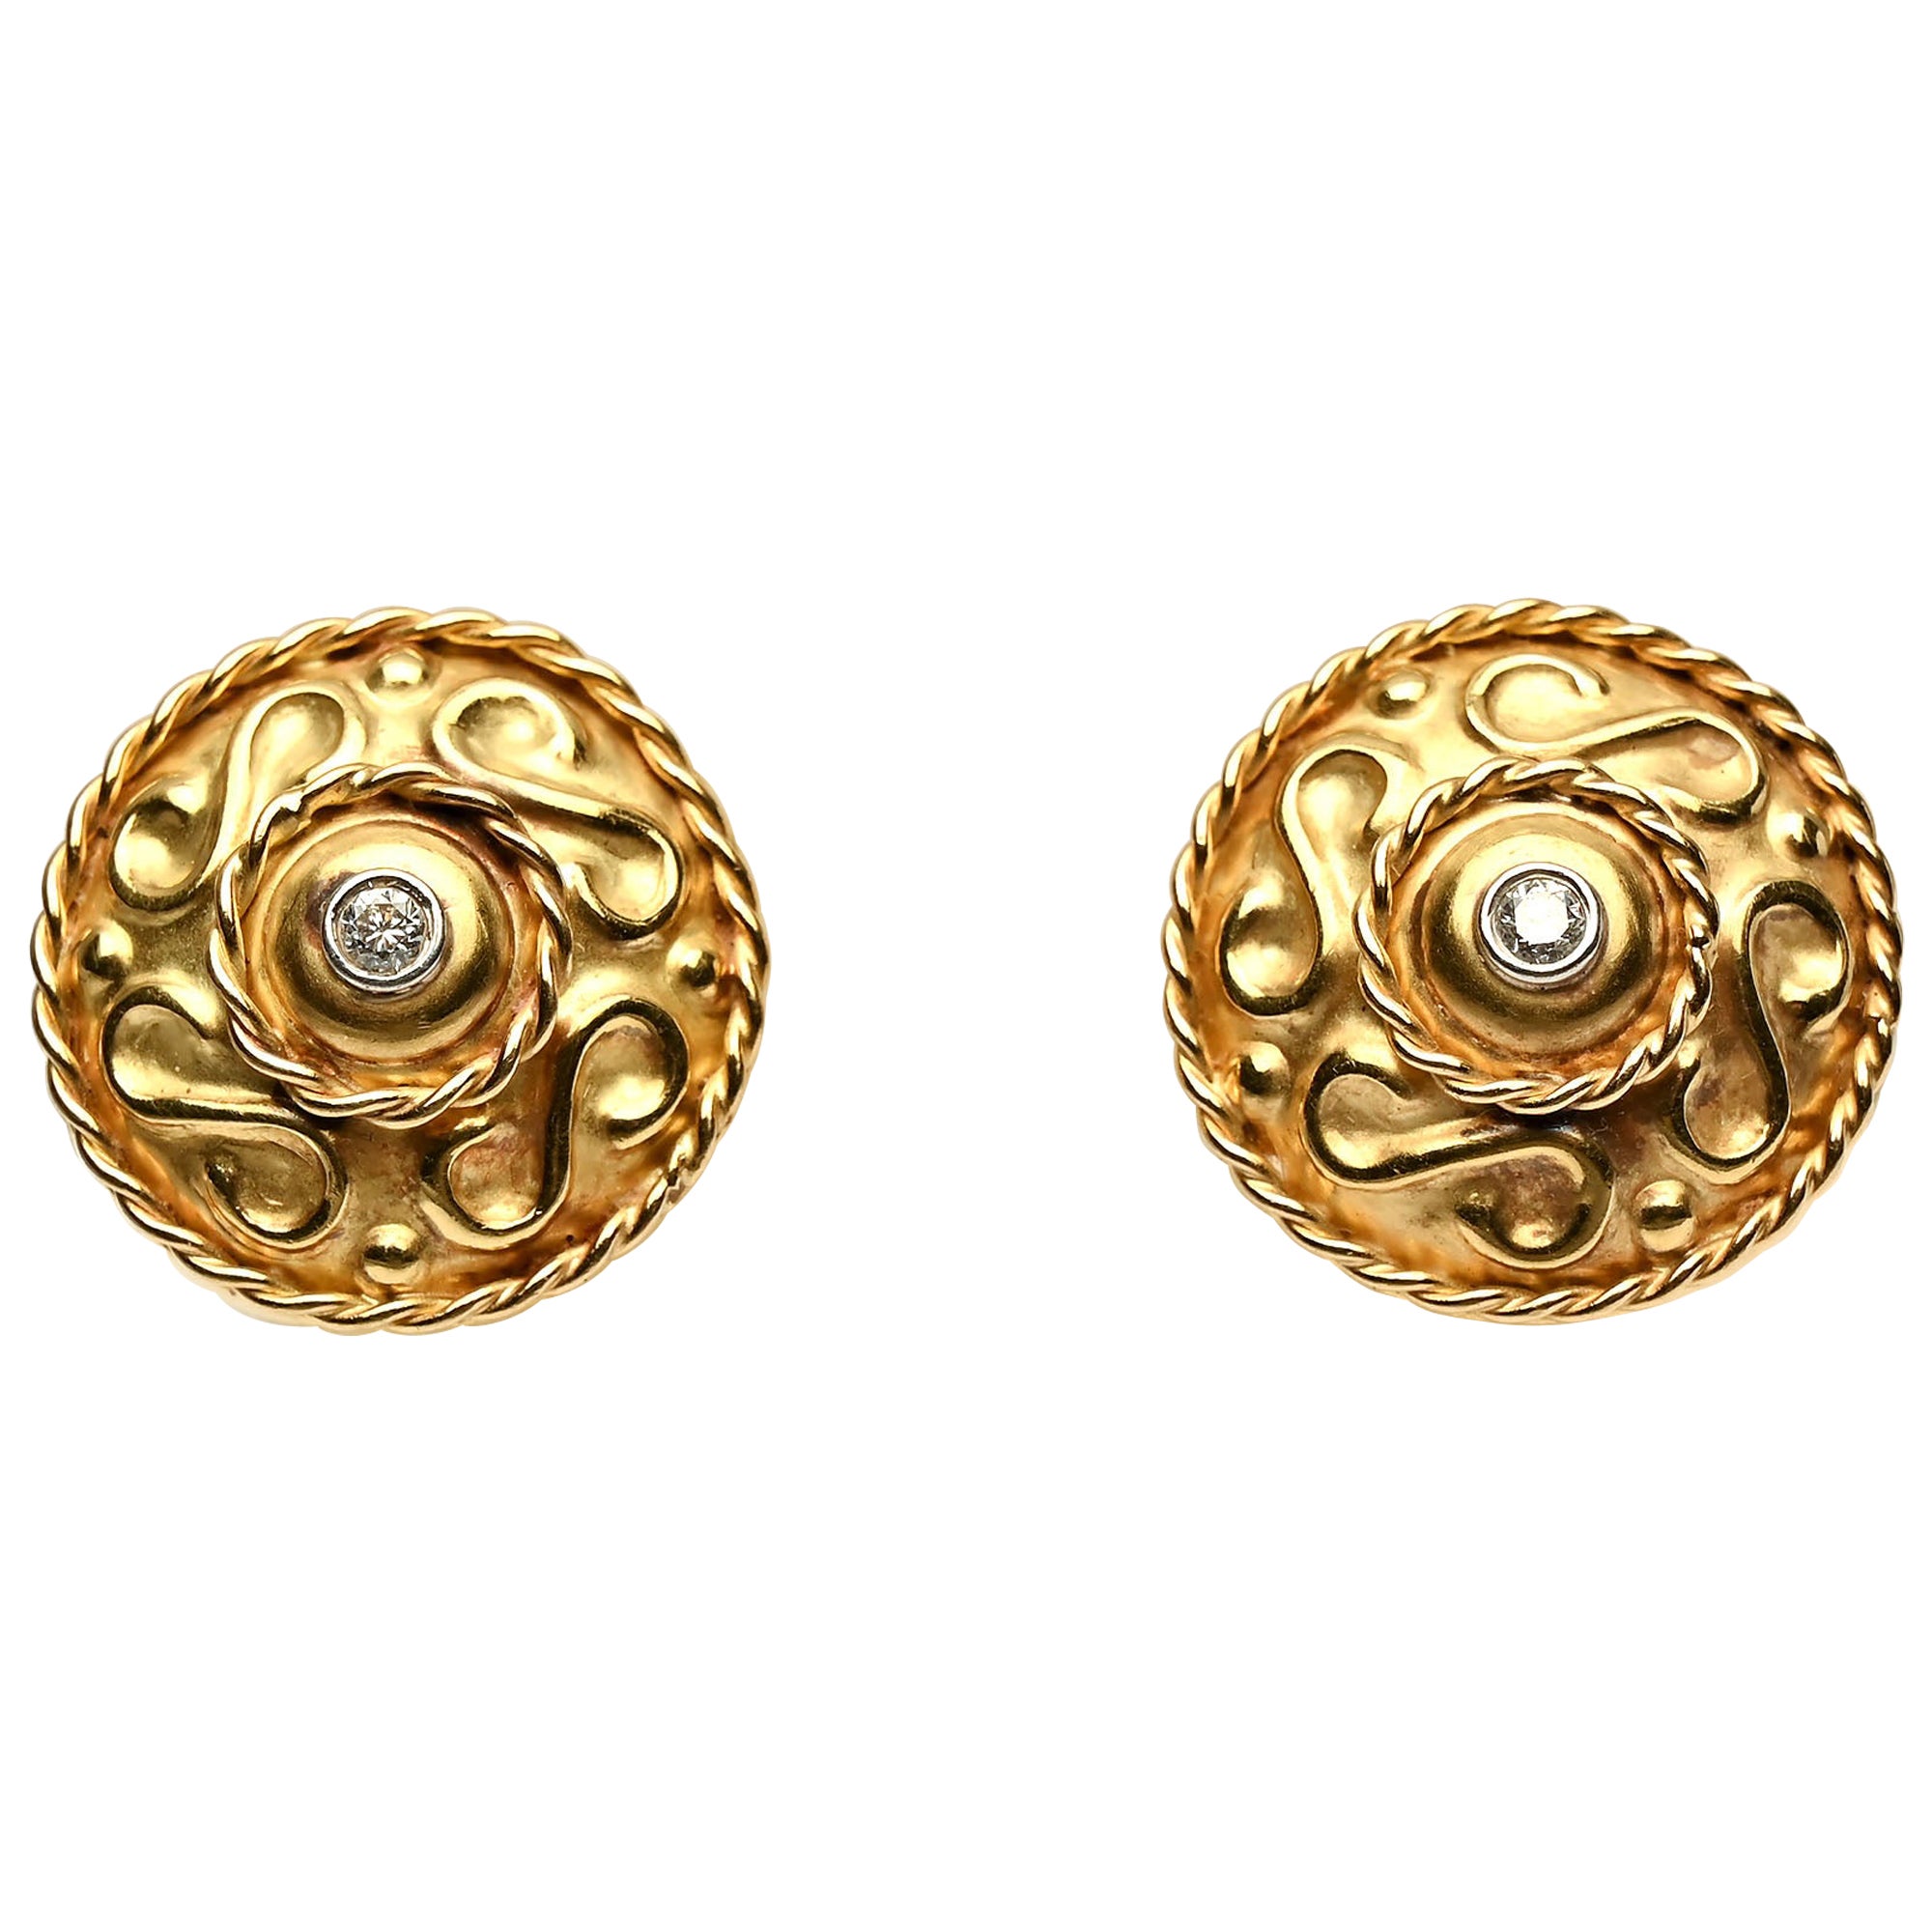 Round Gold Earrings with Center Diamond For Sale